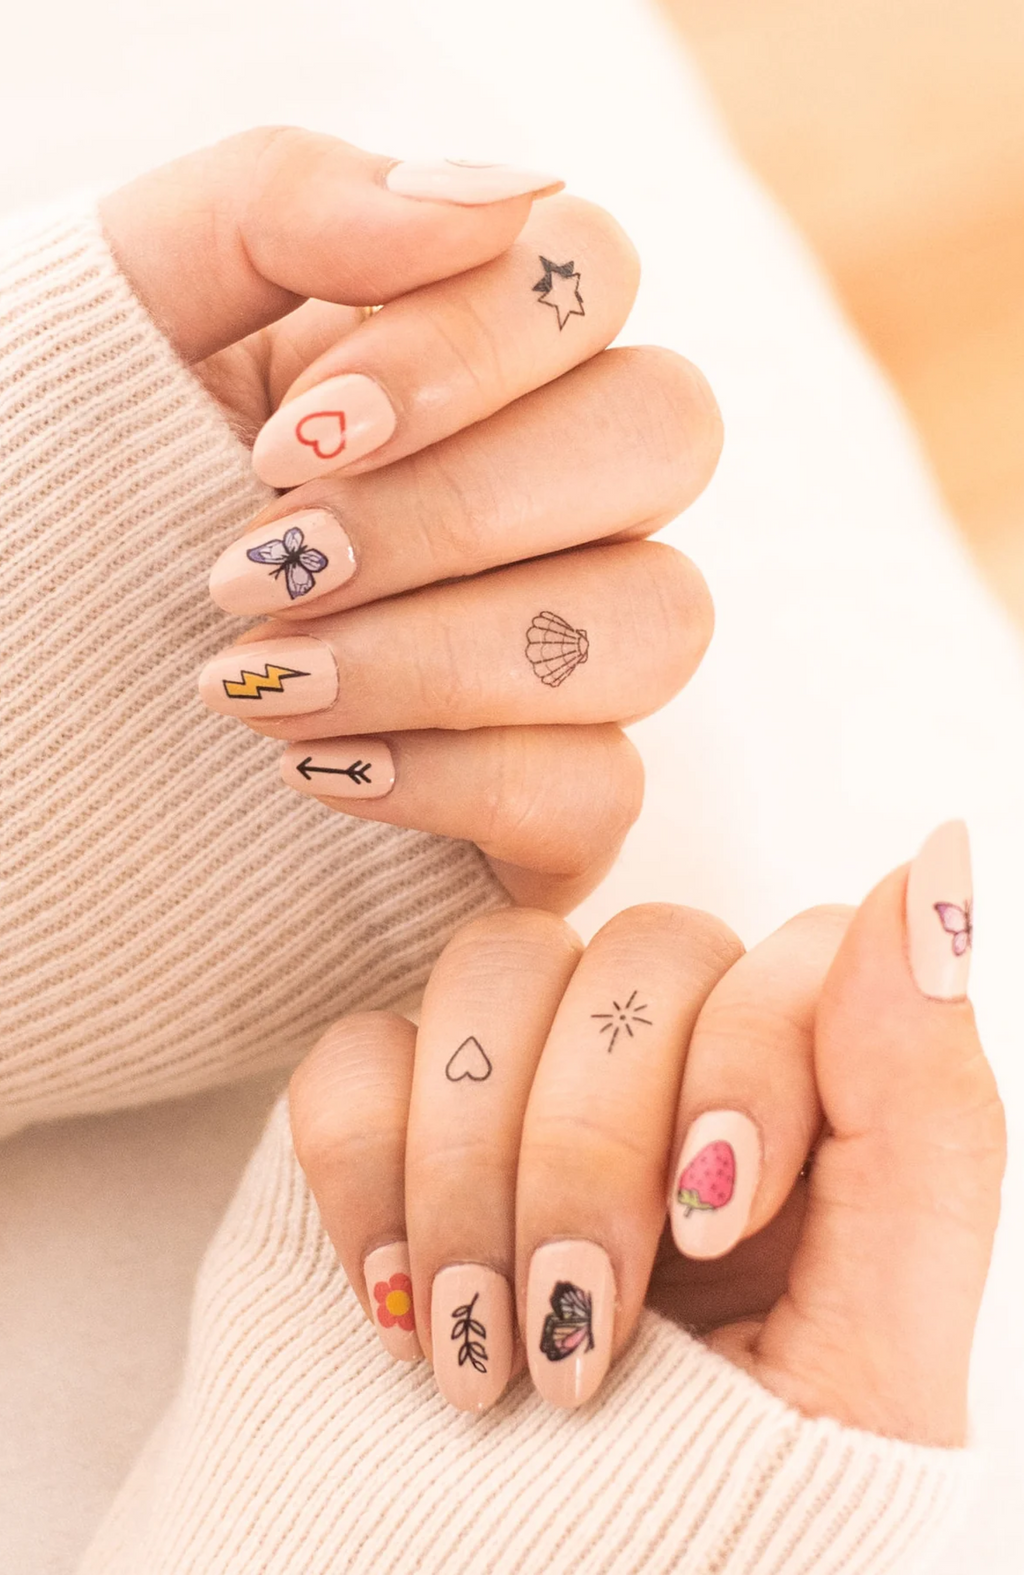 Inked by Dani - Color Nail Art Pack